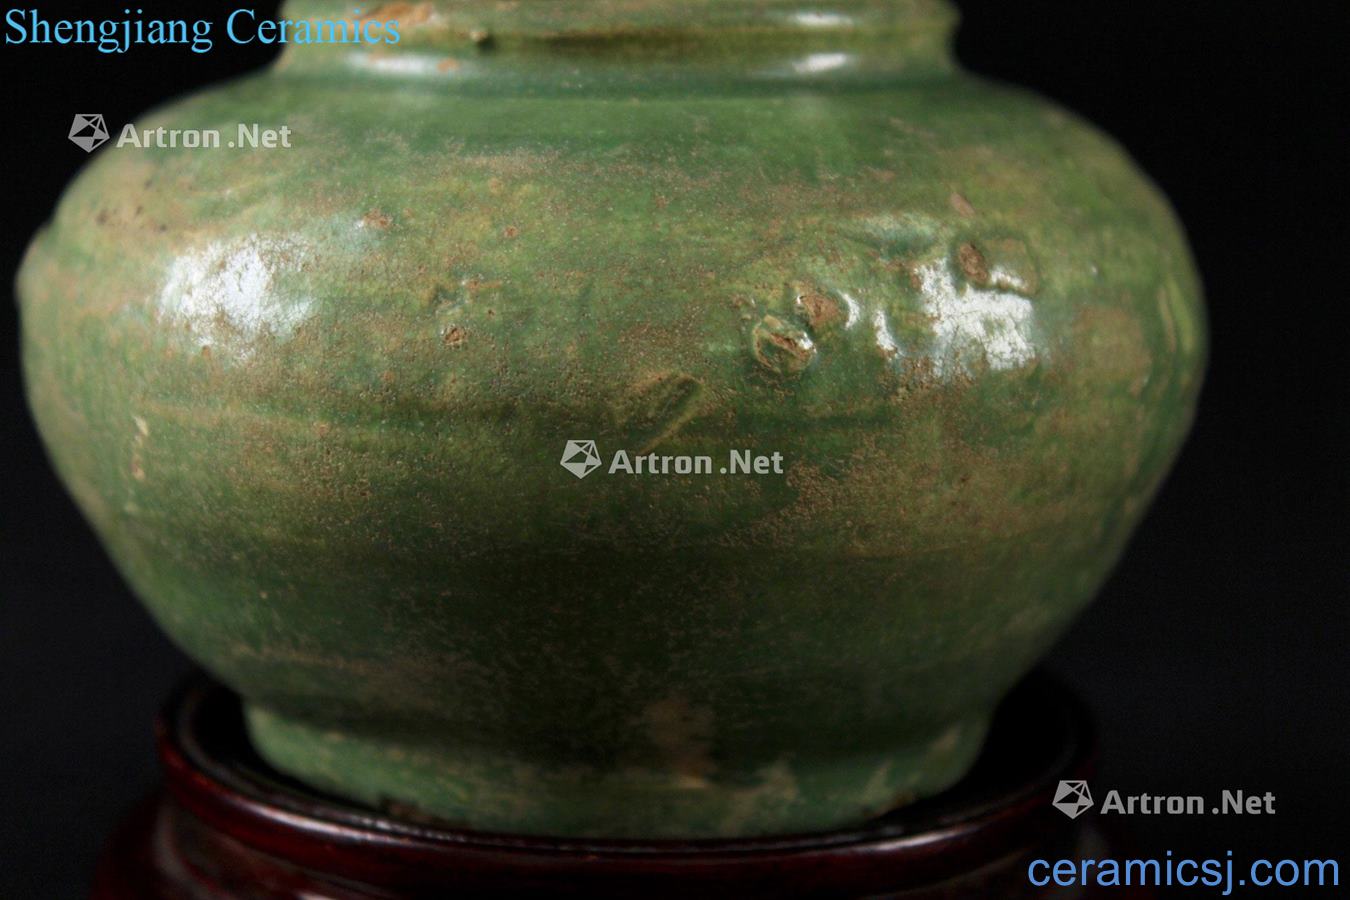 The song dynasty green glazed pot